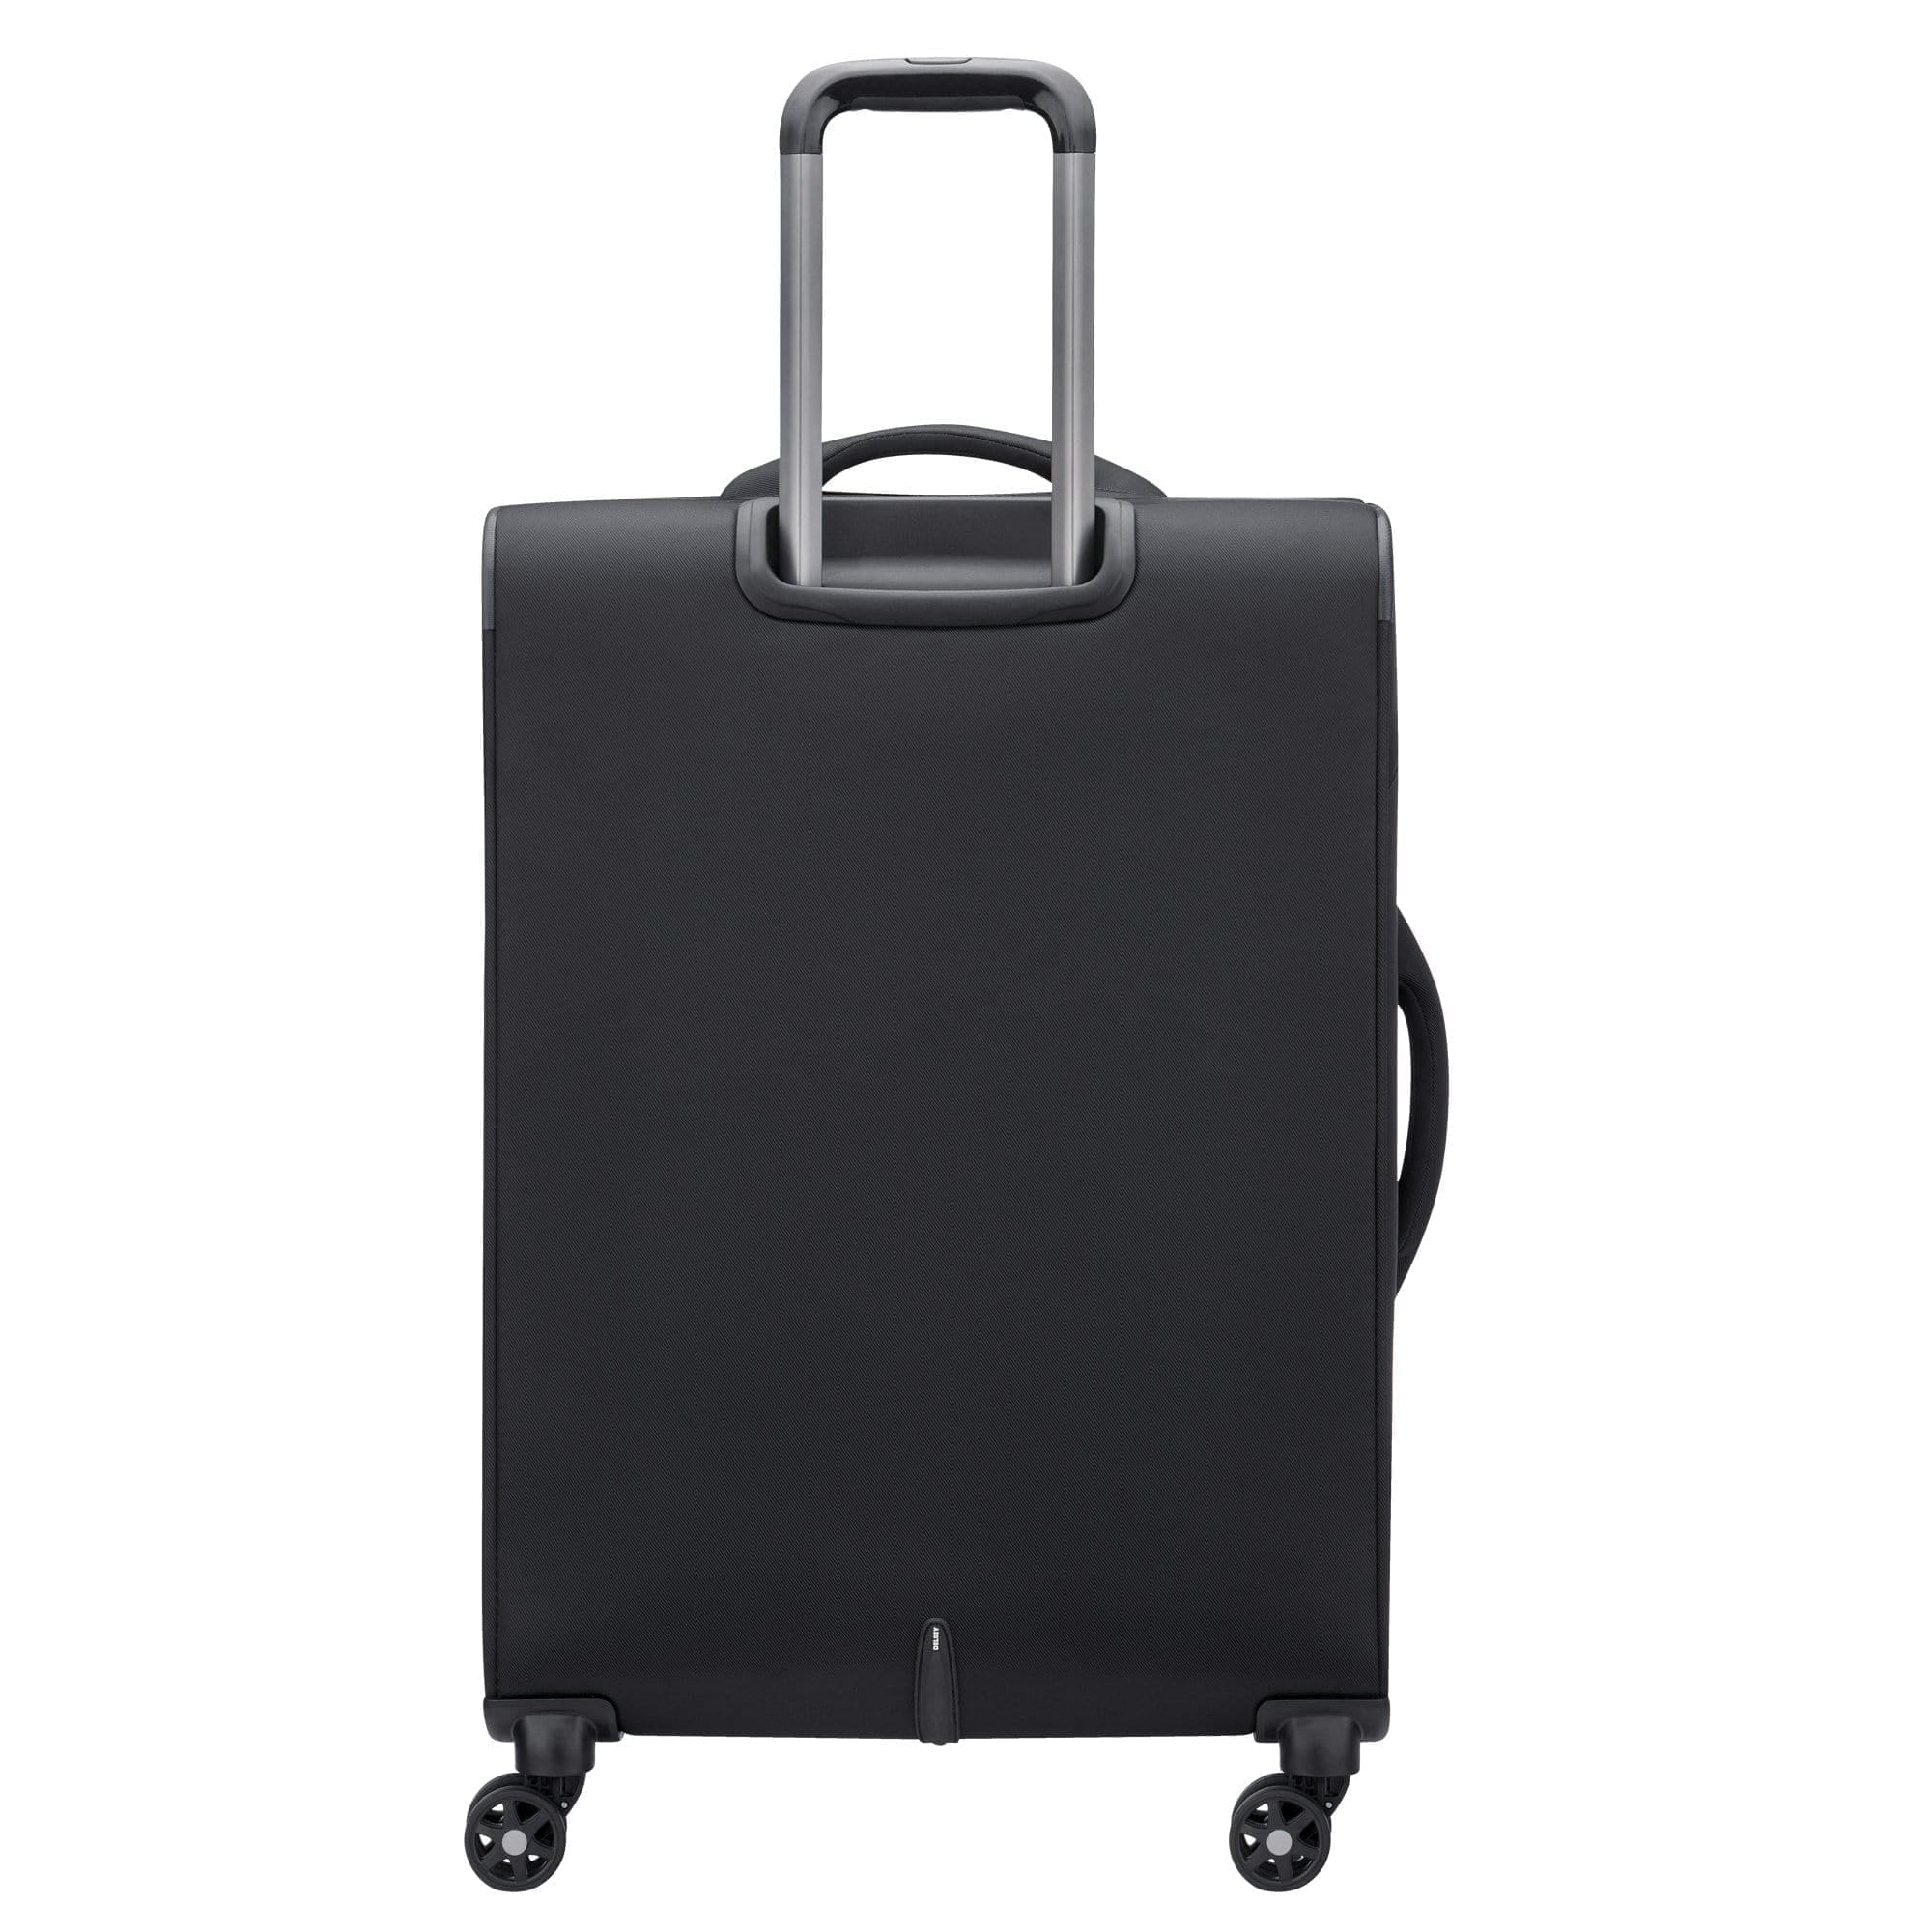 delsey-optimax-lite-70cm-softcase-4-double-wheel-expandable-check-in-luggage-trolley-black-00328582000t9-2.jpg